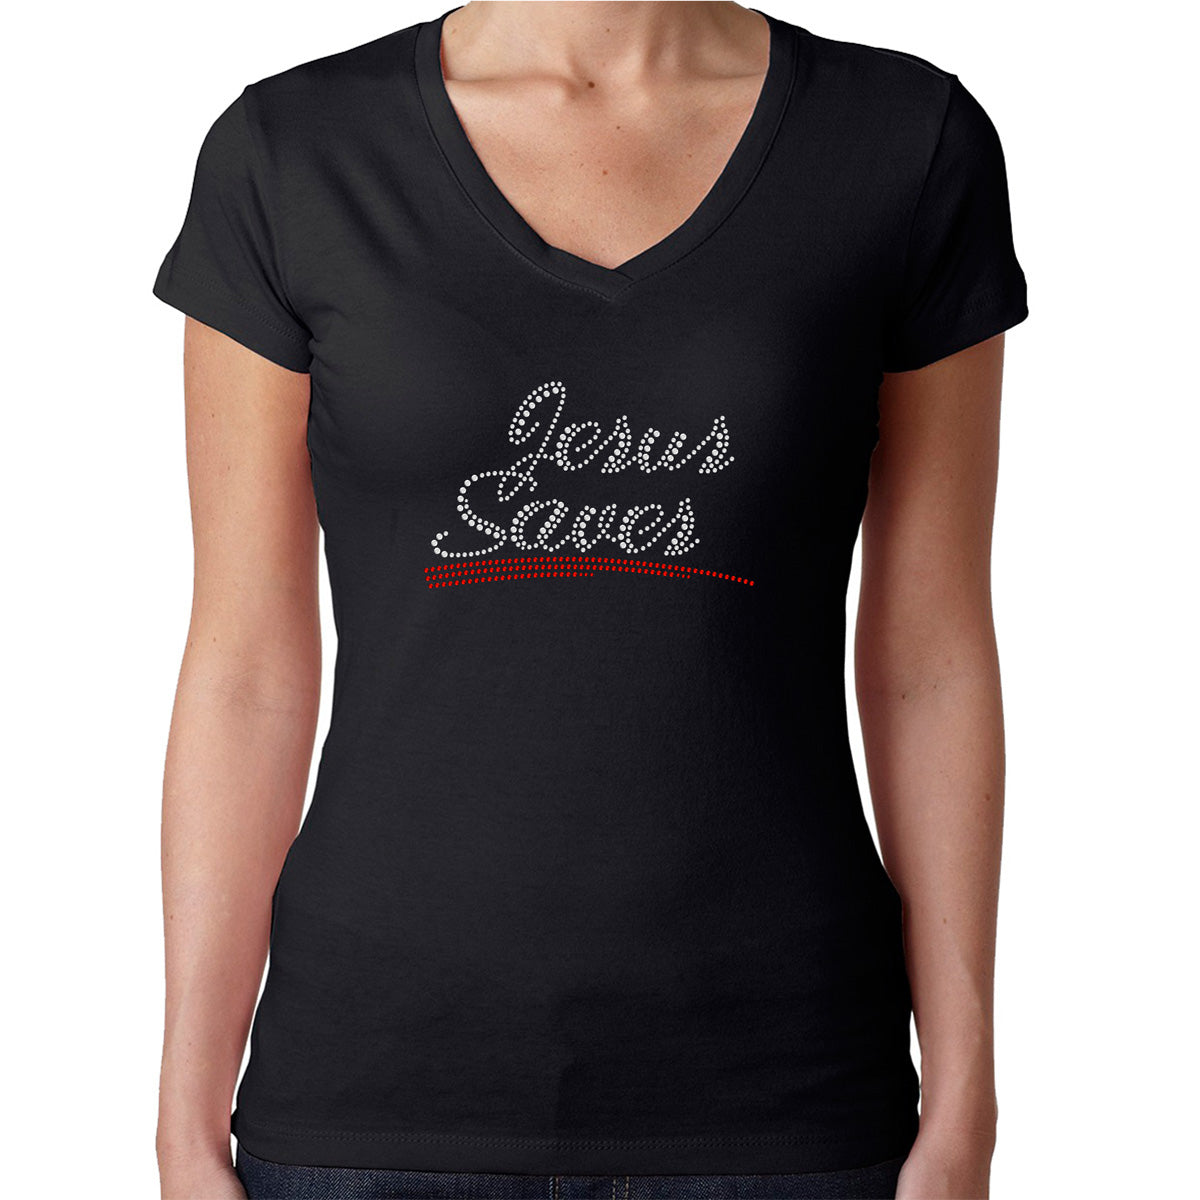 Womens T-Shirt Rhinestone Bling Black Fitted Tee Jesus Saves Sparkle White